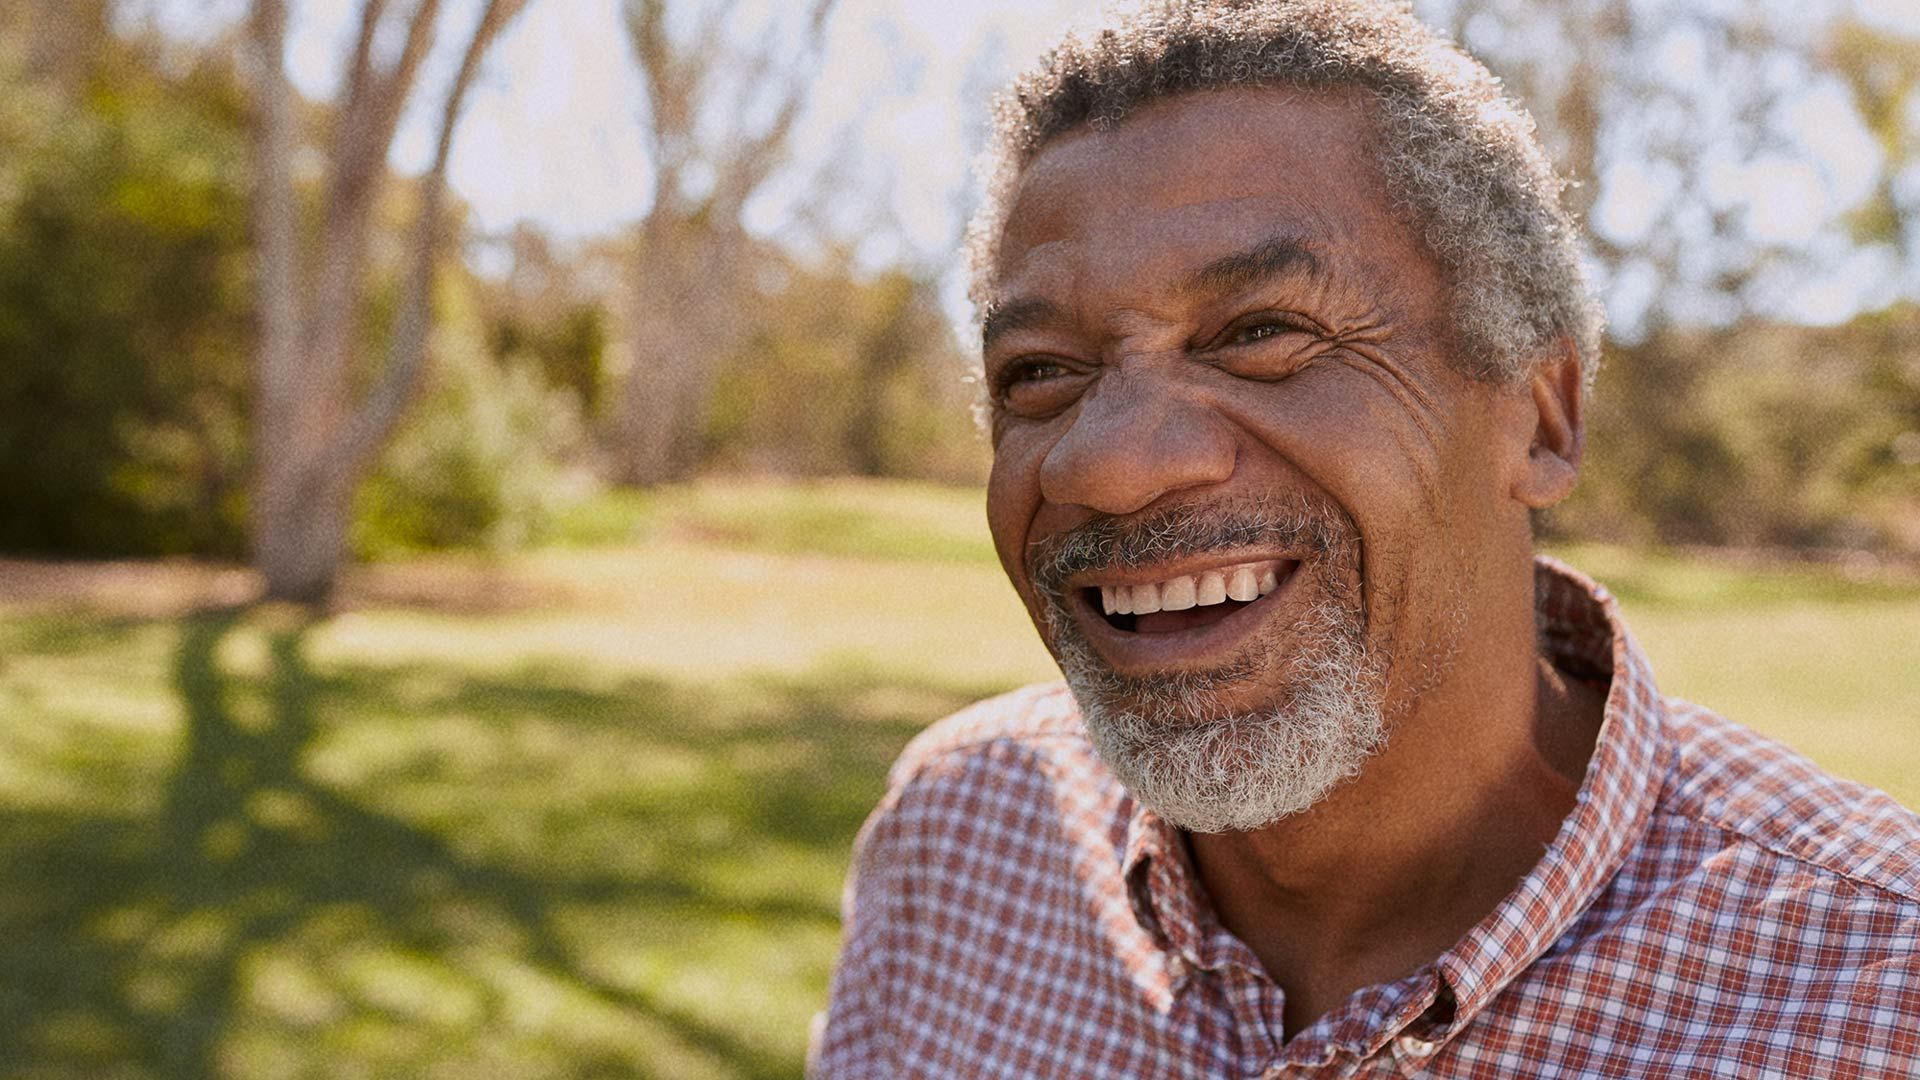 A mature-aged Black man smiling while looking past the camera.